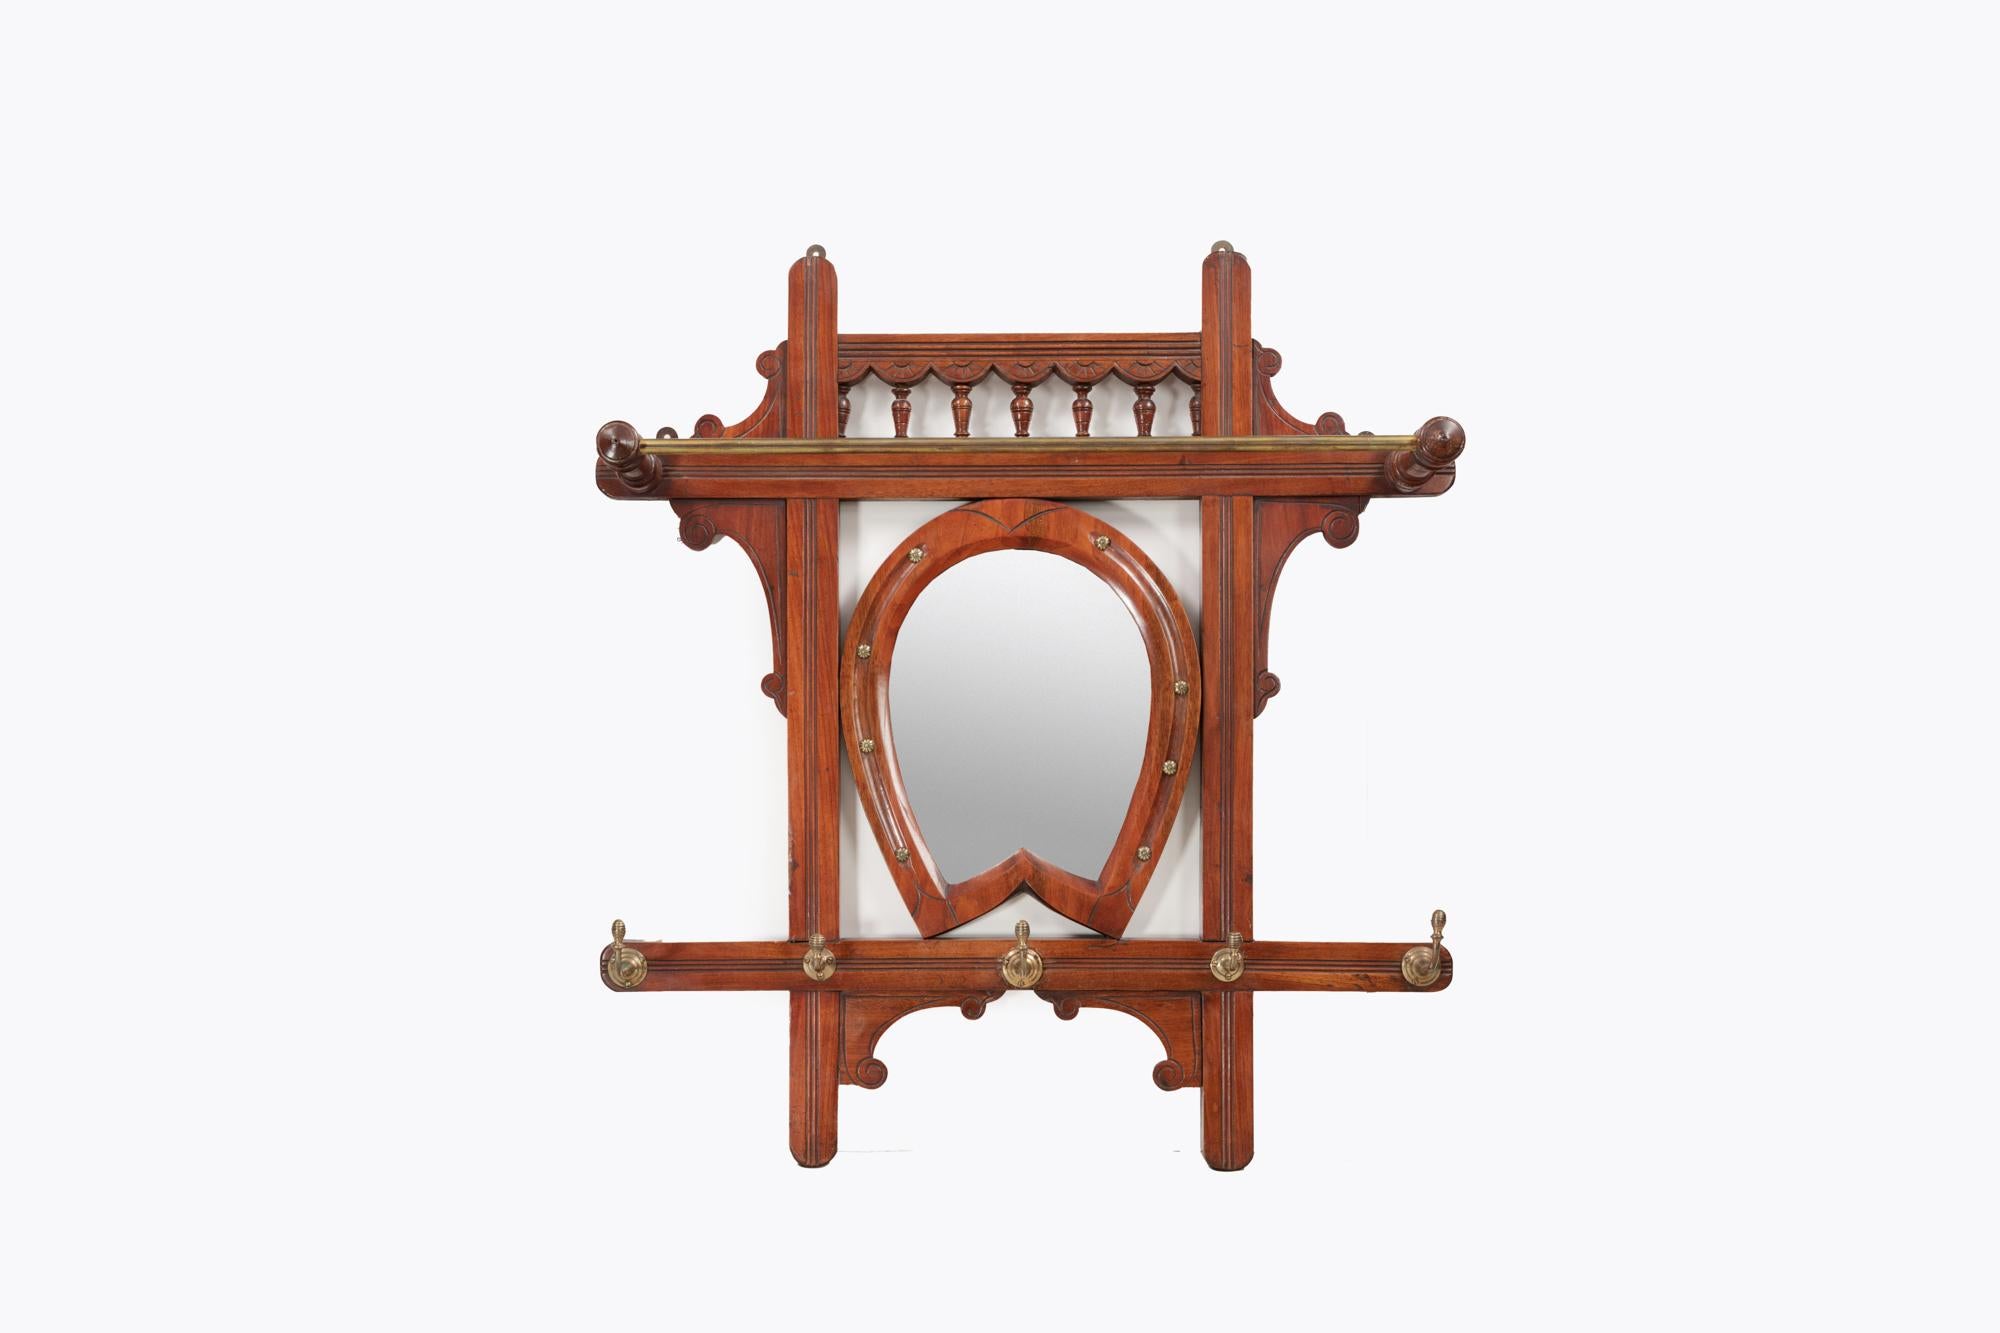 19th Century hanging hall rack with decorative central horseshoe shaped mirror with bevelled plate and brass studs. This piece is complete with turned supports, carved panels, brass hanging hat hooks and a brass hanging rail. Circa 1880.